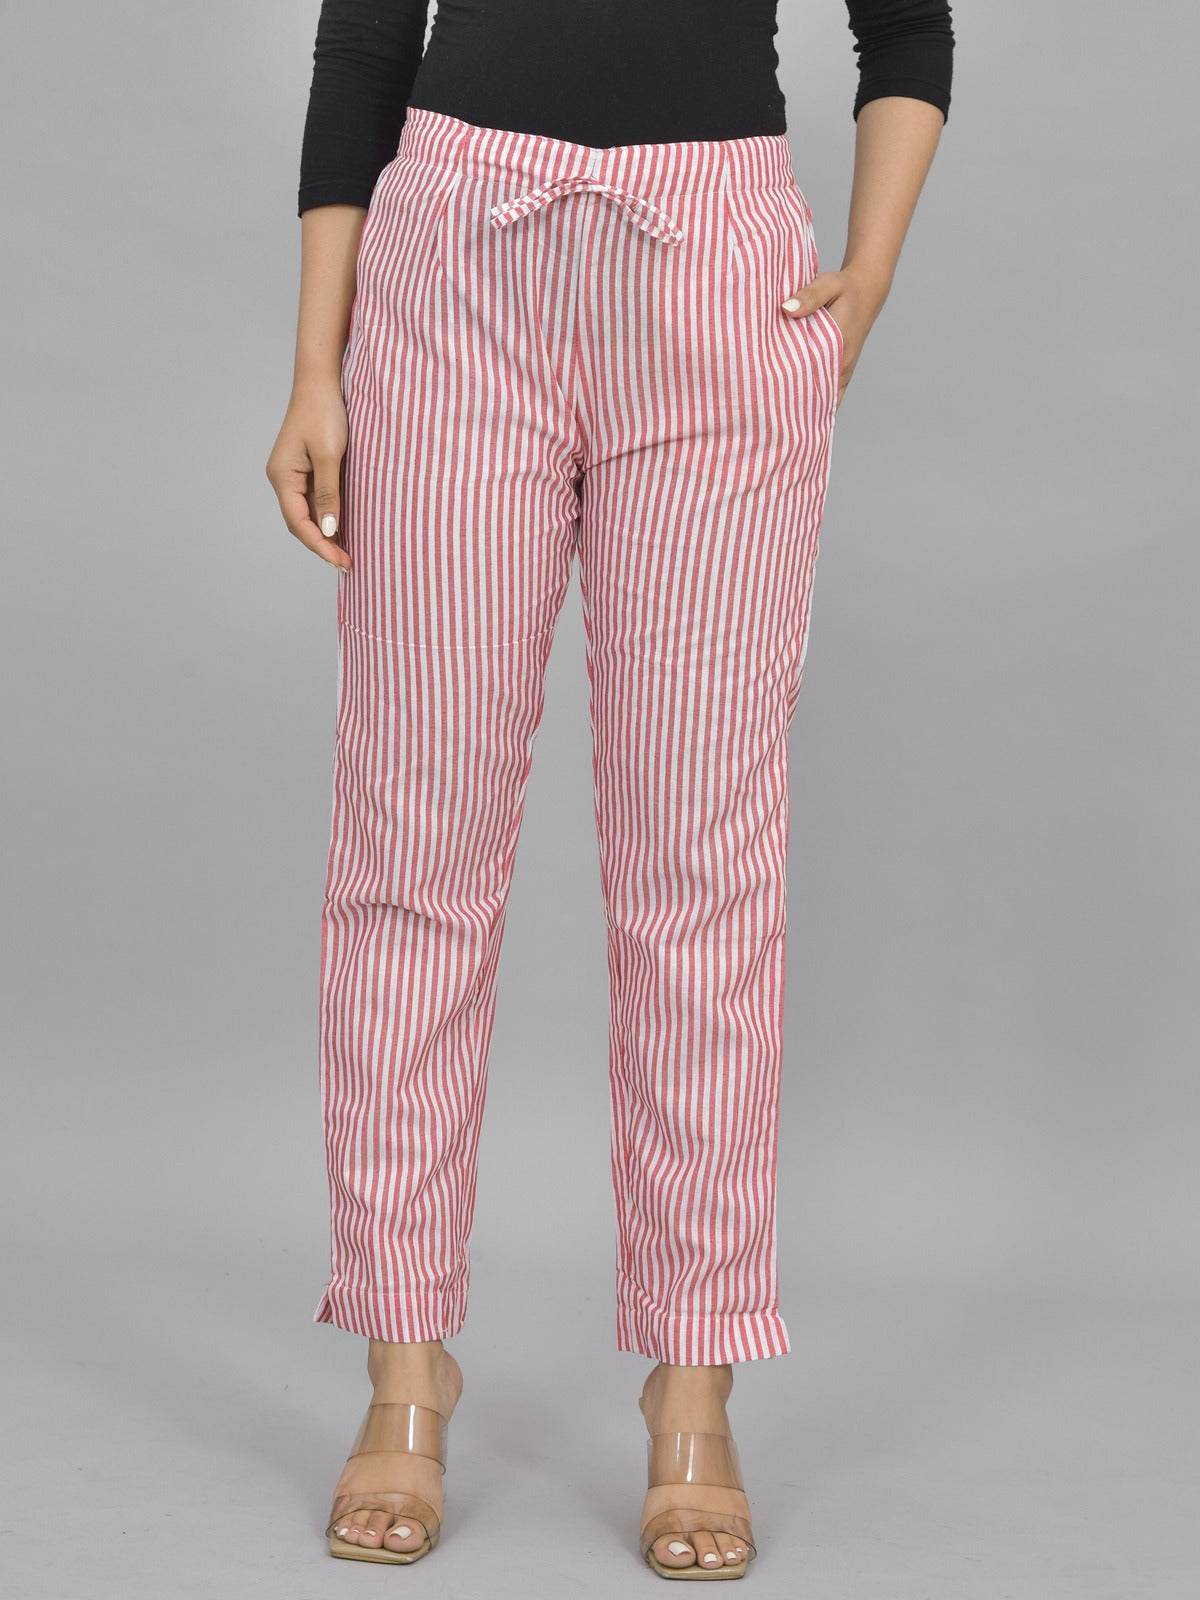 Combo Pack of 2 Womens Cream And Red Cotton Stripe Trouser